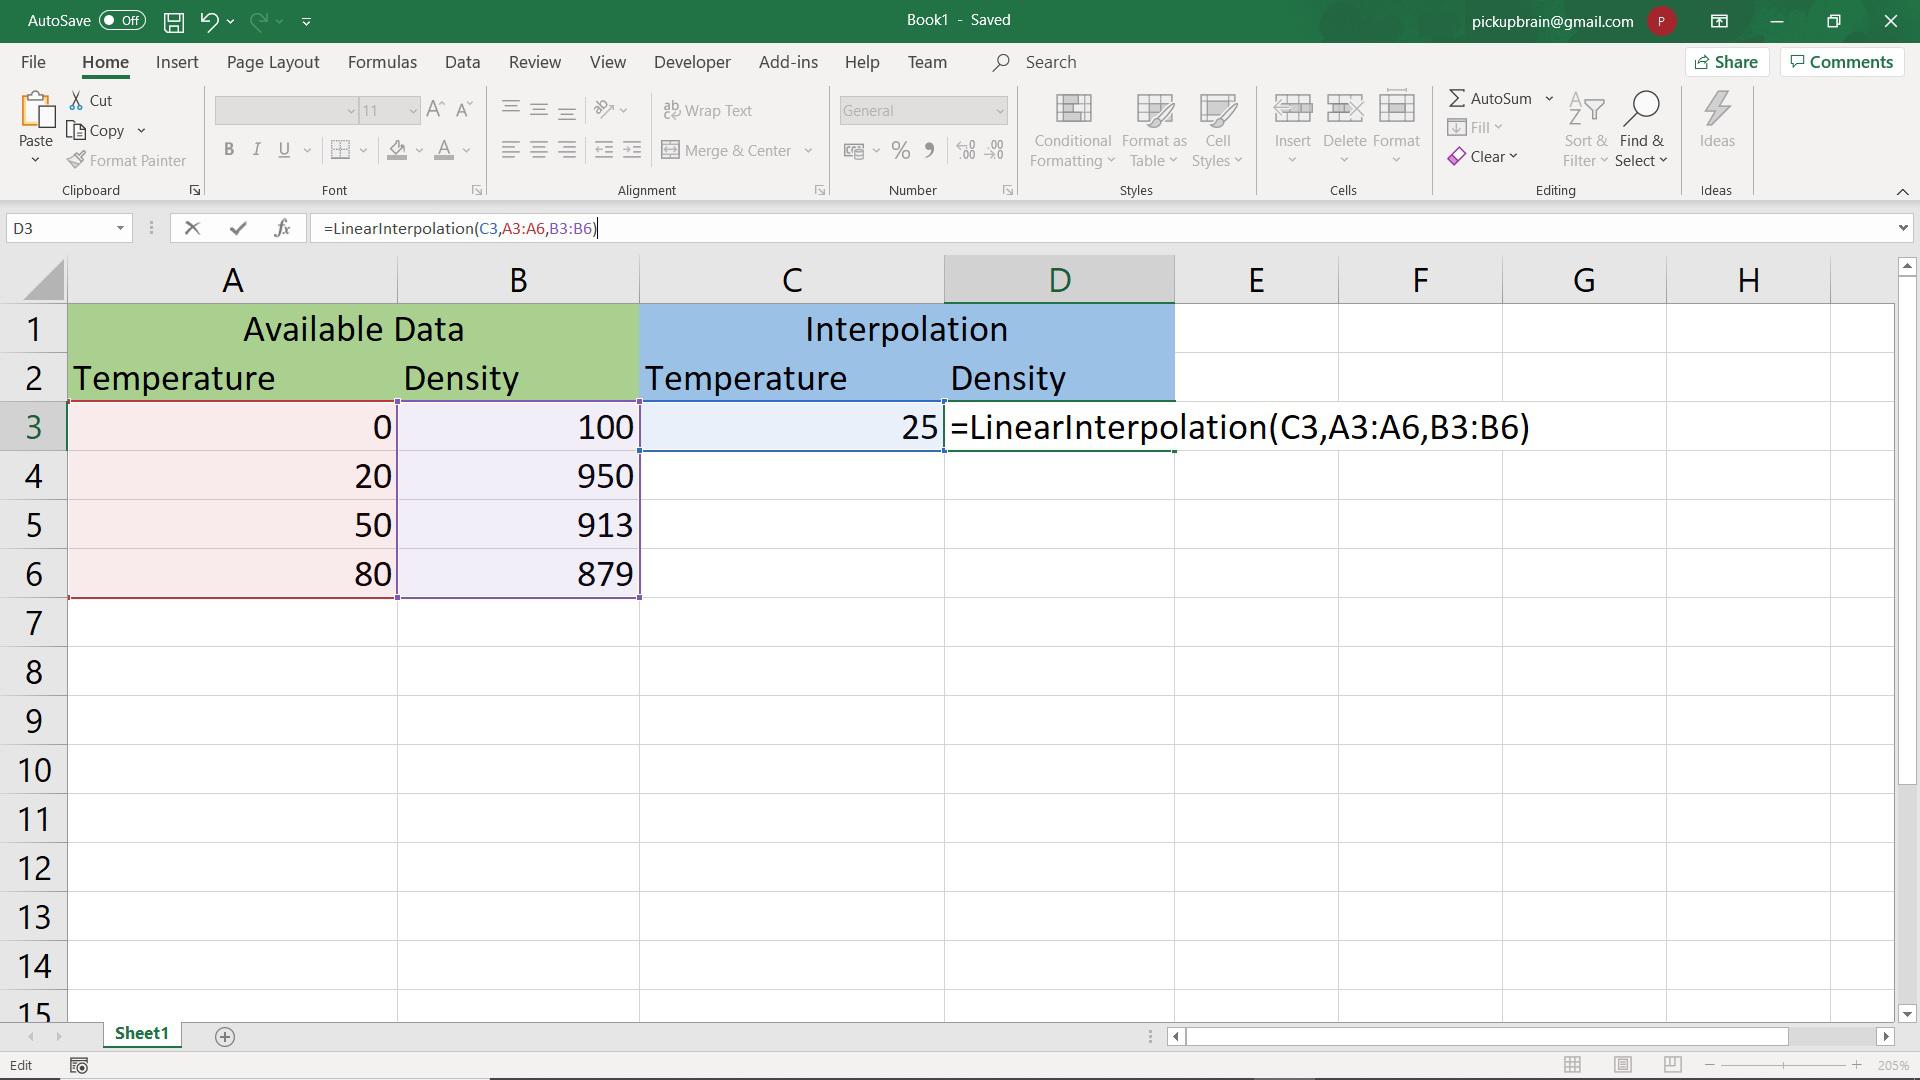 Linear Interpolation in Excel